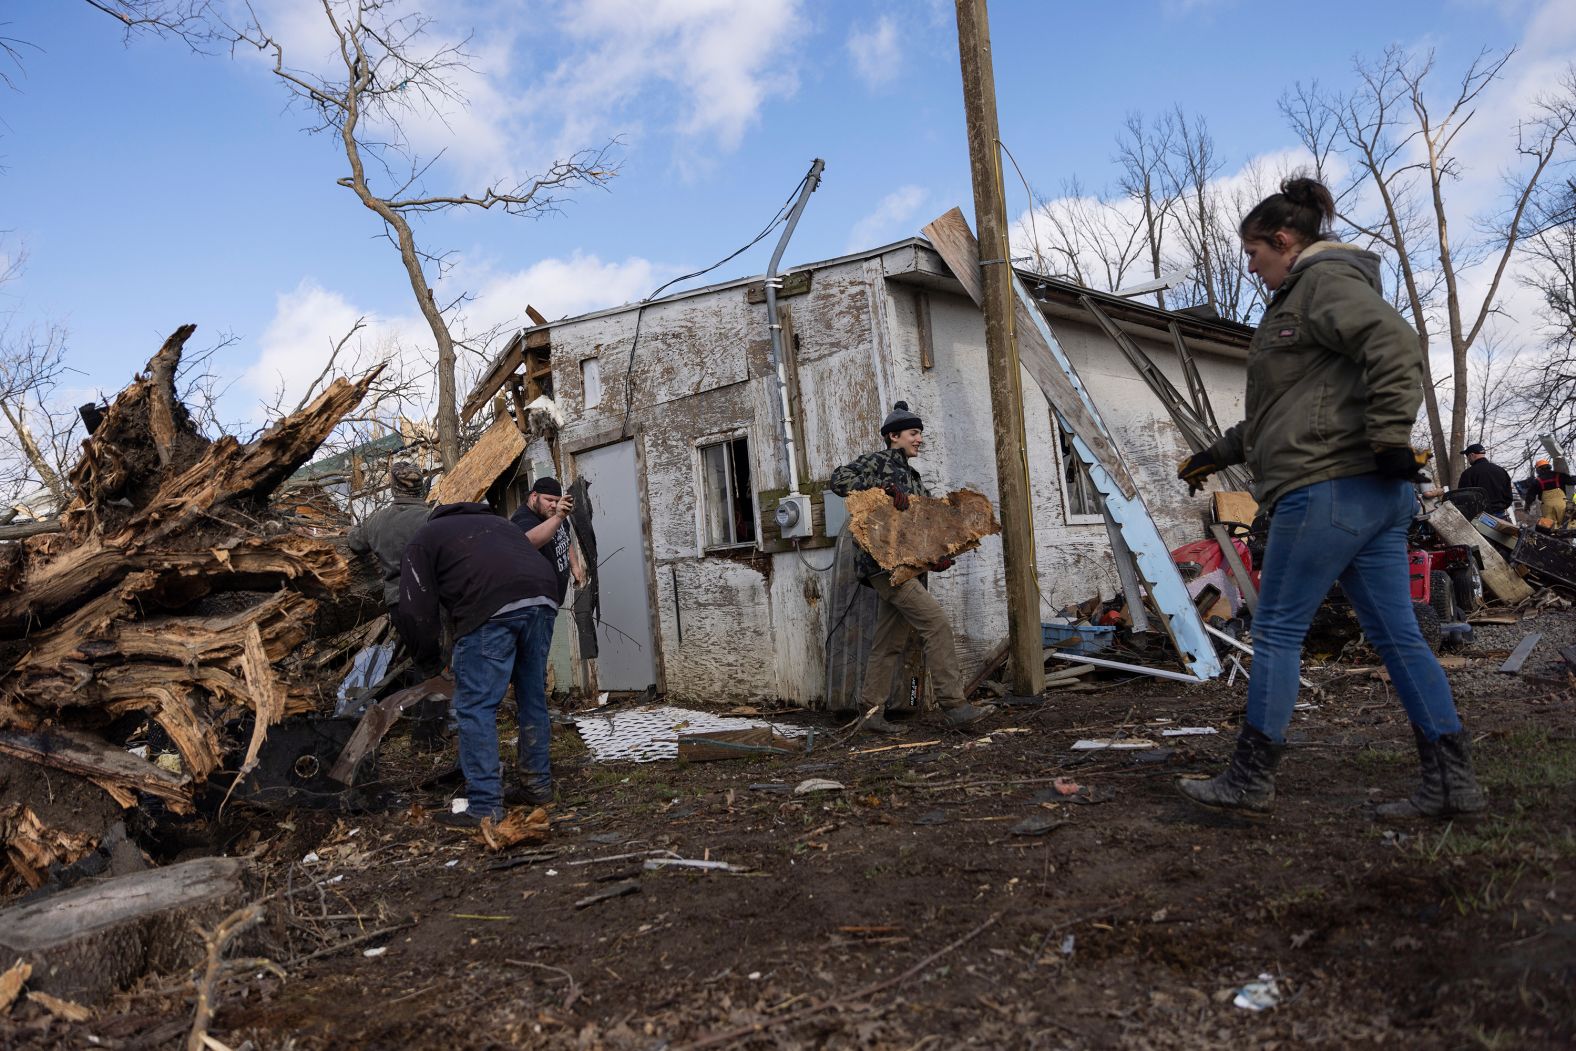 People clean up in the aftermath of a tornado in Lakeview, Ohio, on Friday, March 15. <a href="https://www.cnn.com/2024/03/15/weather/indiana-ohio-storm-tornado-damage-friday/index.html" target="_blank">Damaging storms and tornadoes</a> swept through Indiana and Ohio, leaving at least three people dead, destroying parts of towns and prompting search and rescue efforts, officials said.